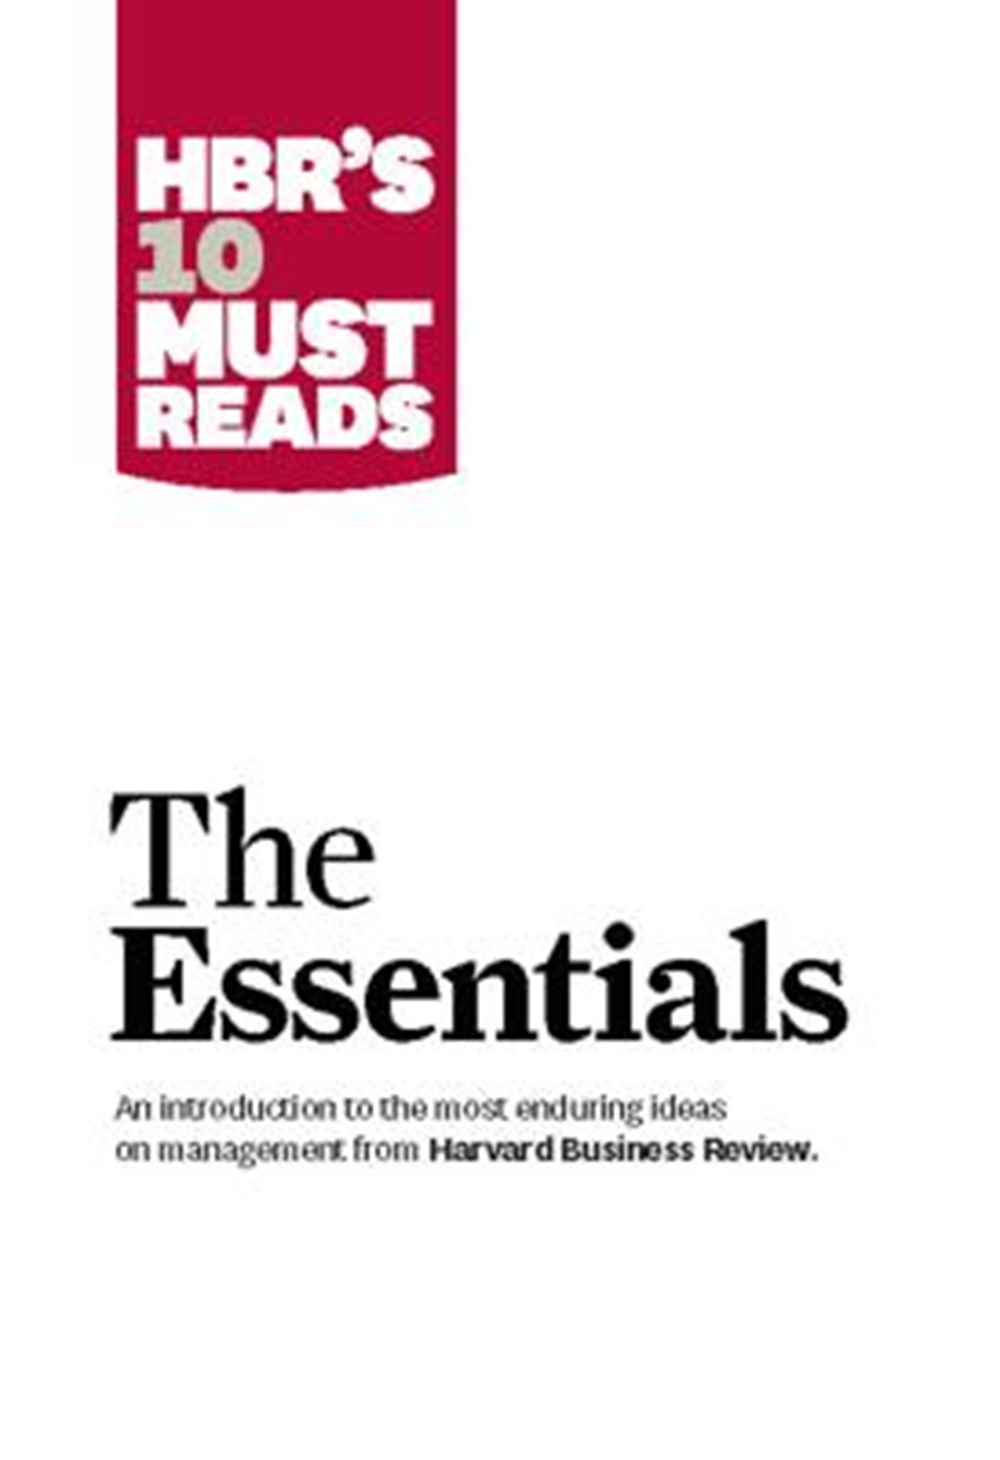 Hbr's 10 Must Reads The Essentials